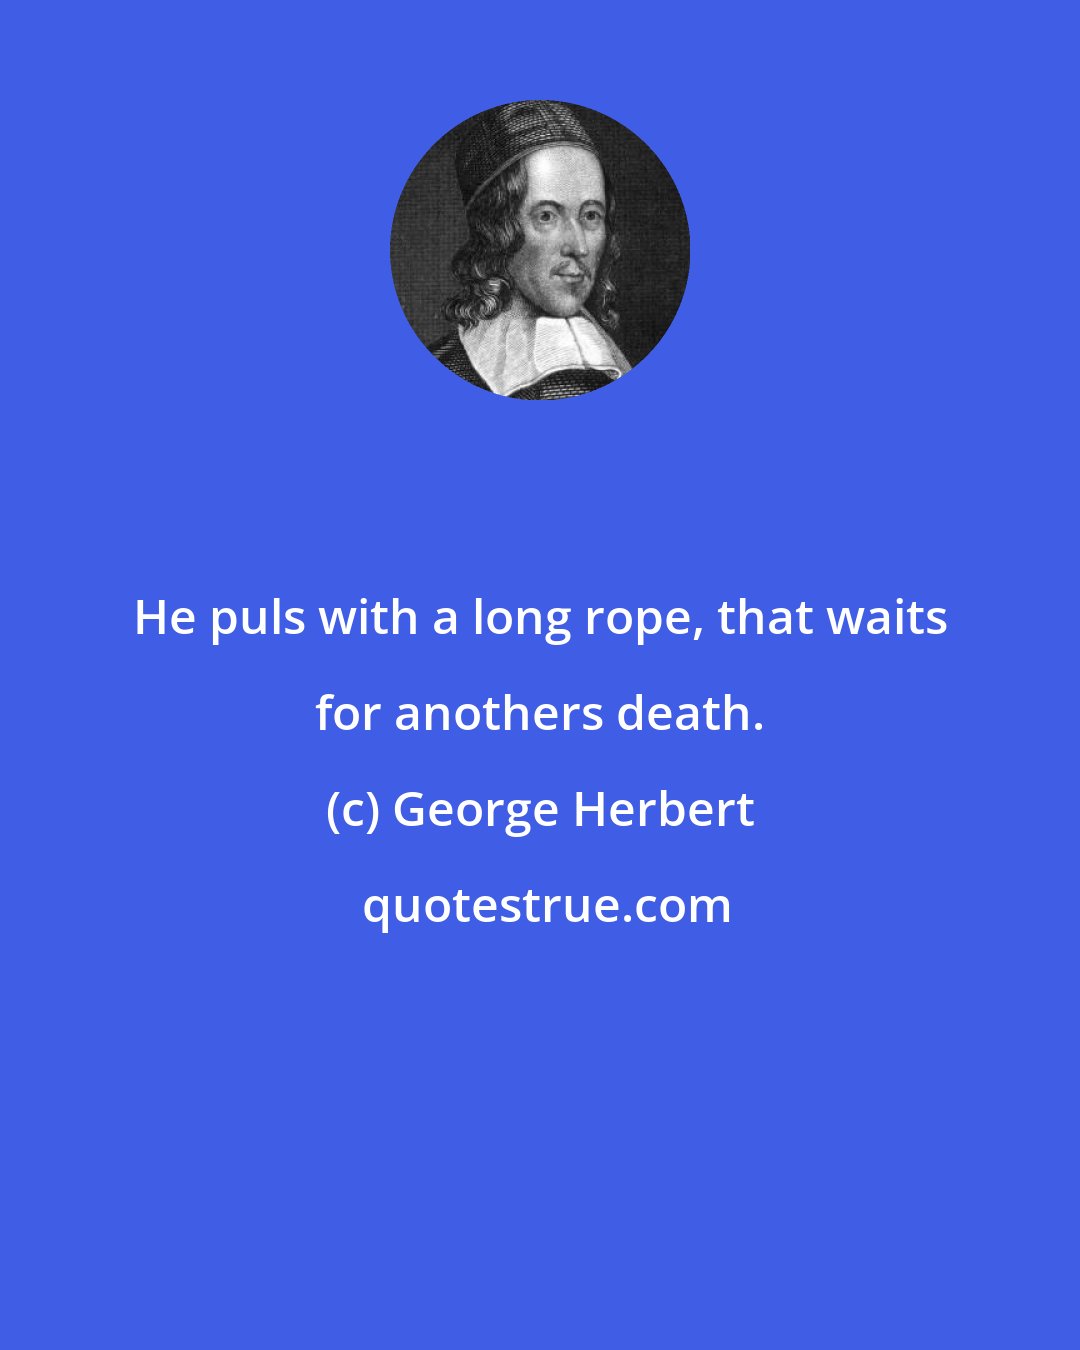 George Herbert: He puls with a long rope, that waits for anothers death.